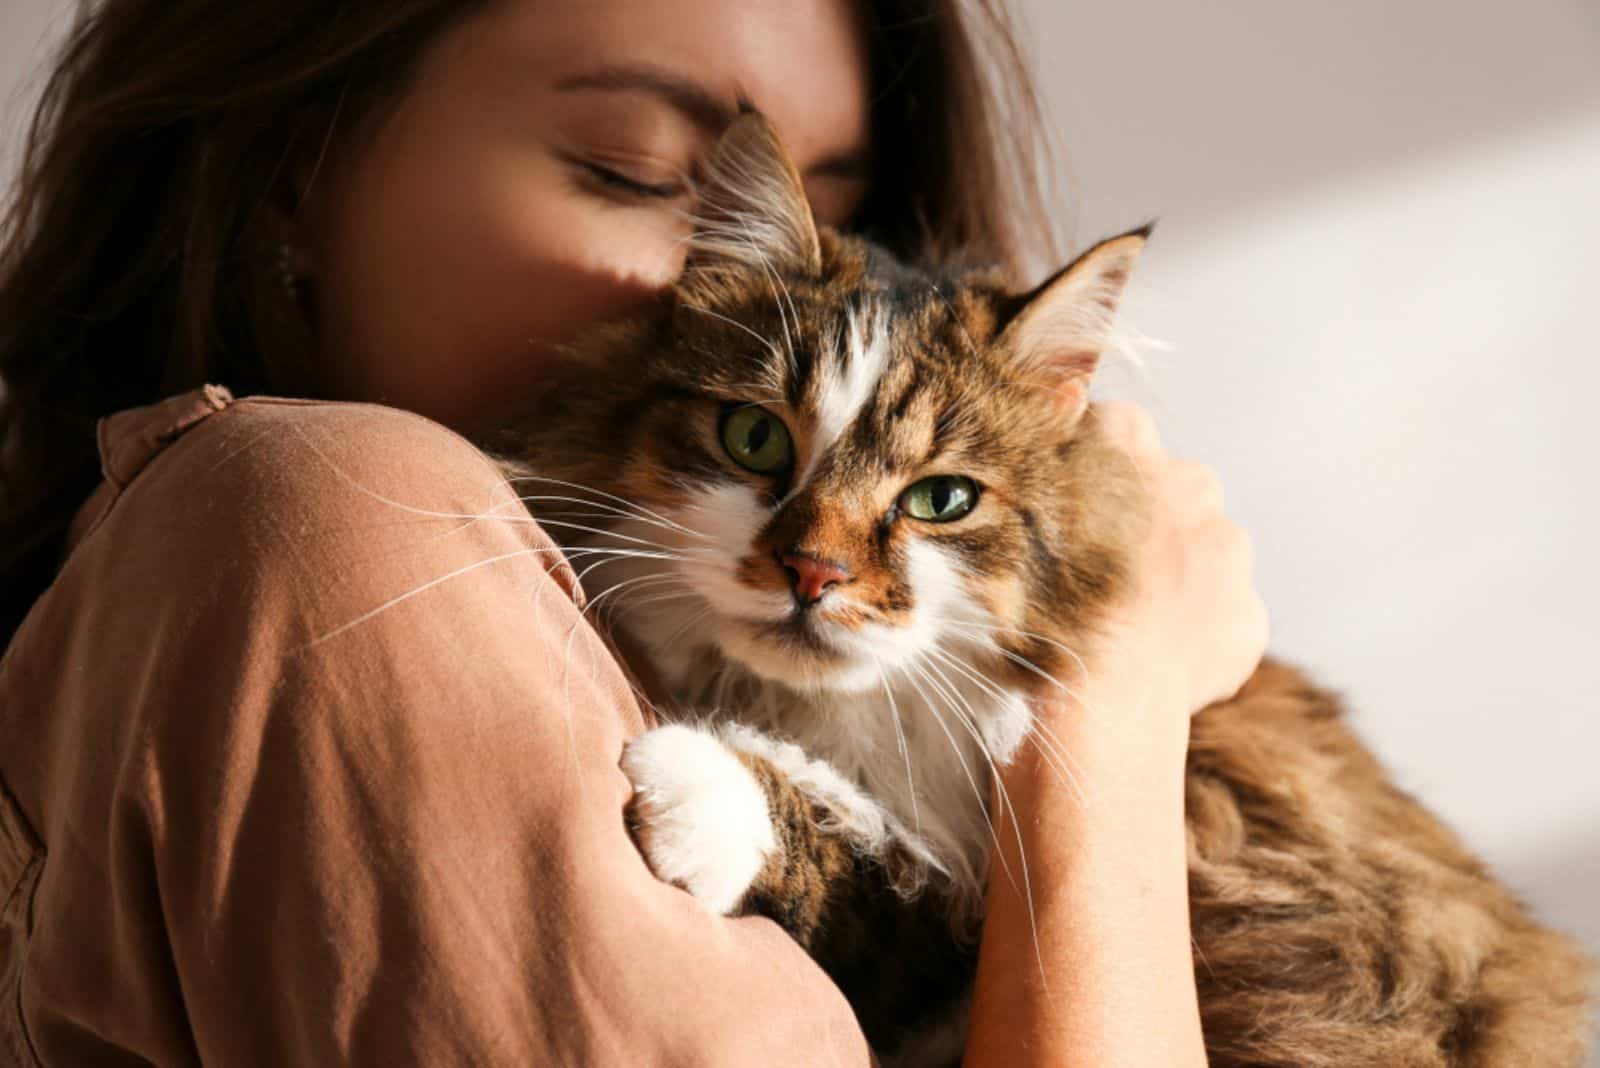 young woman cuddling with ragamuffin cat